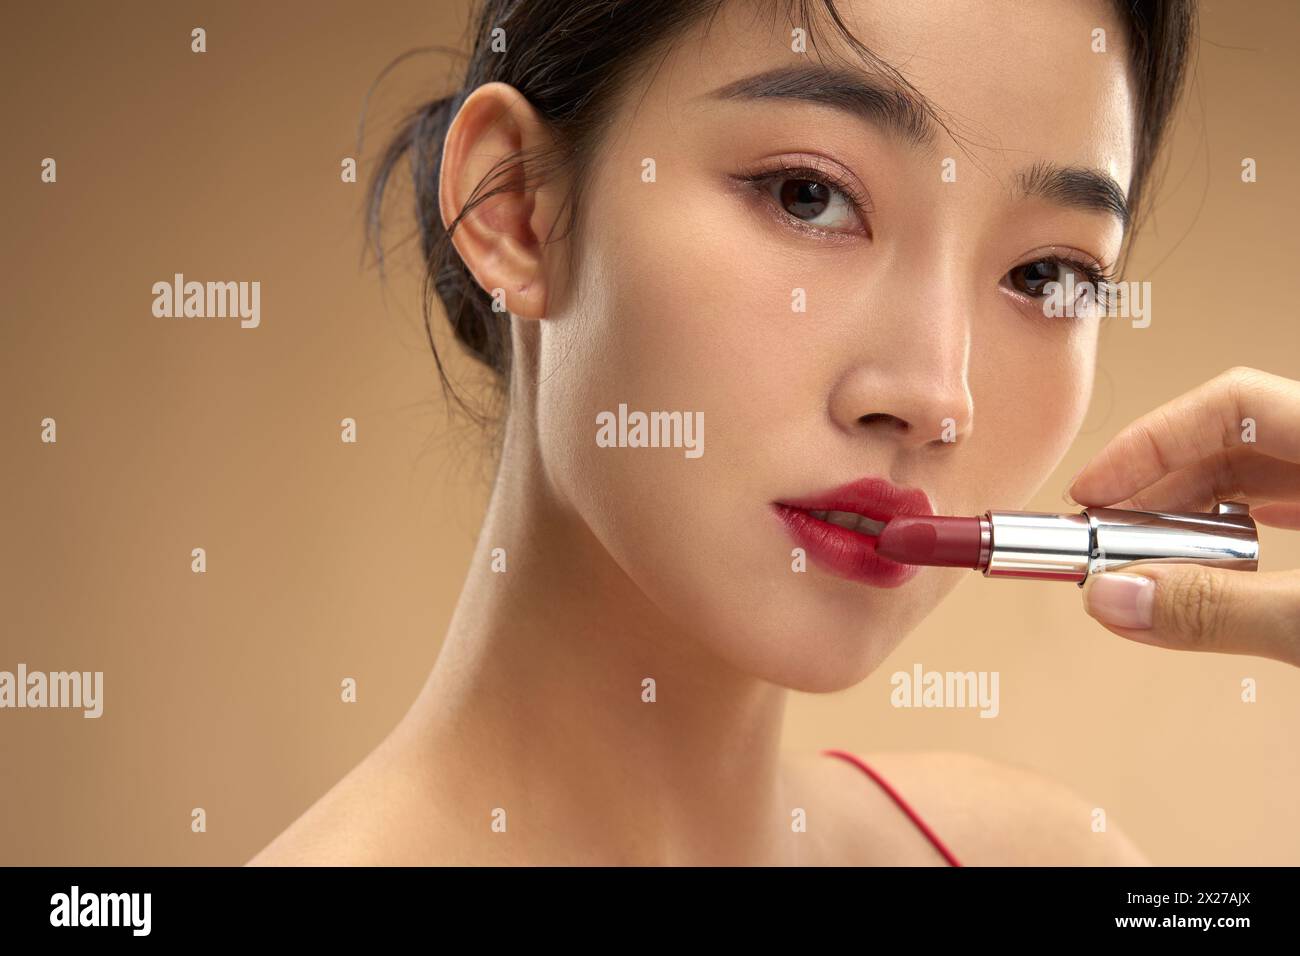 Young and beautiful women apply makeup and lipstick Stock Photo